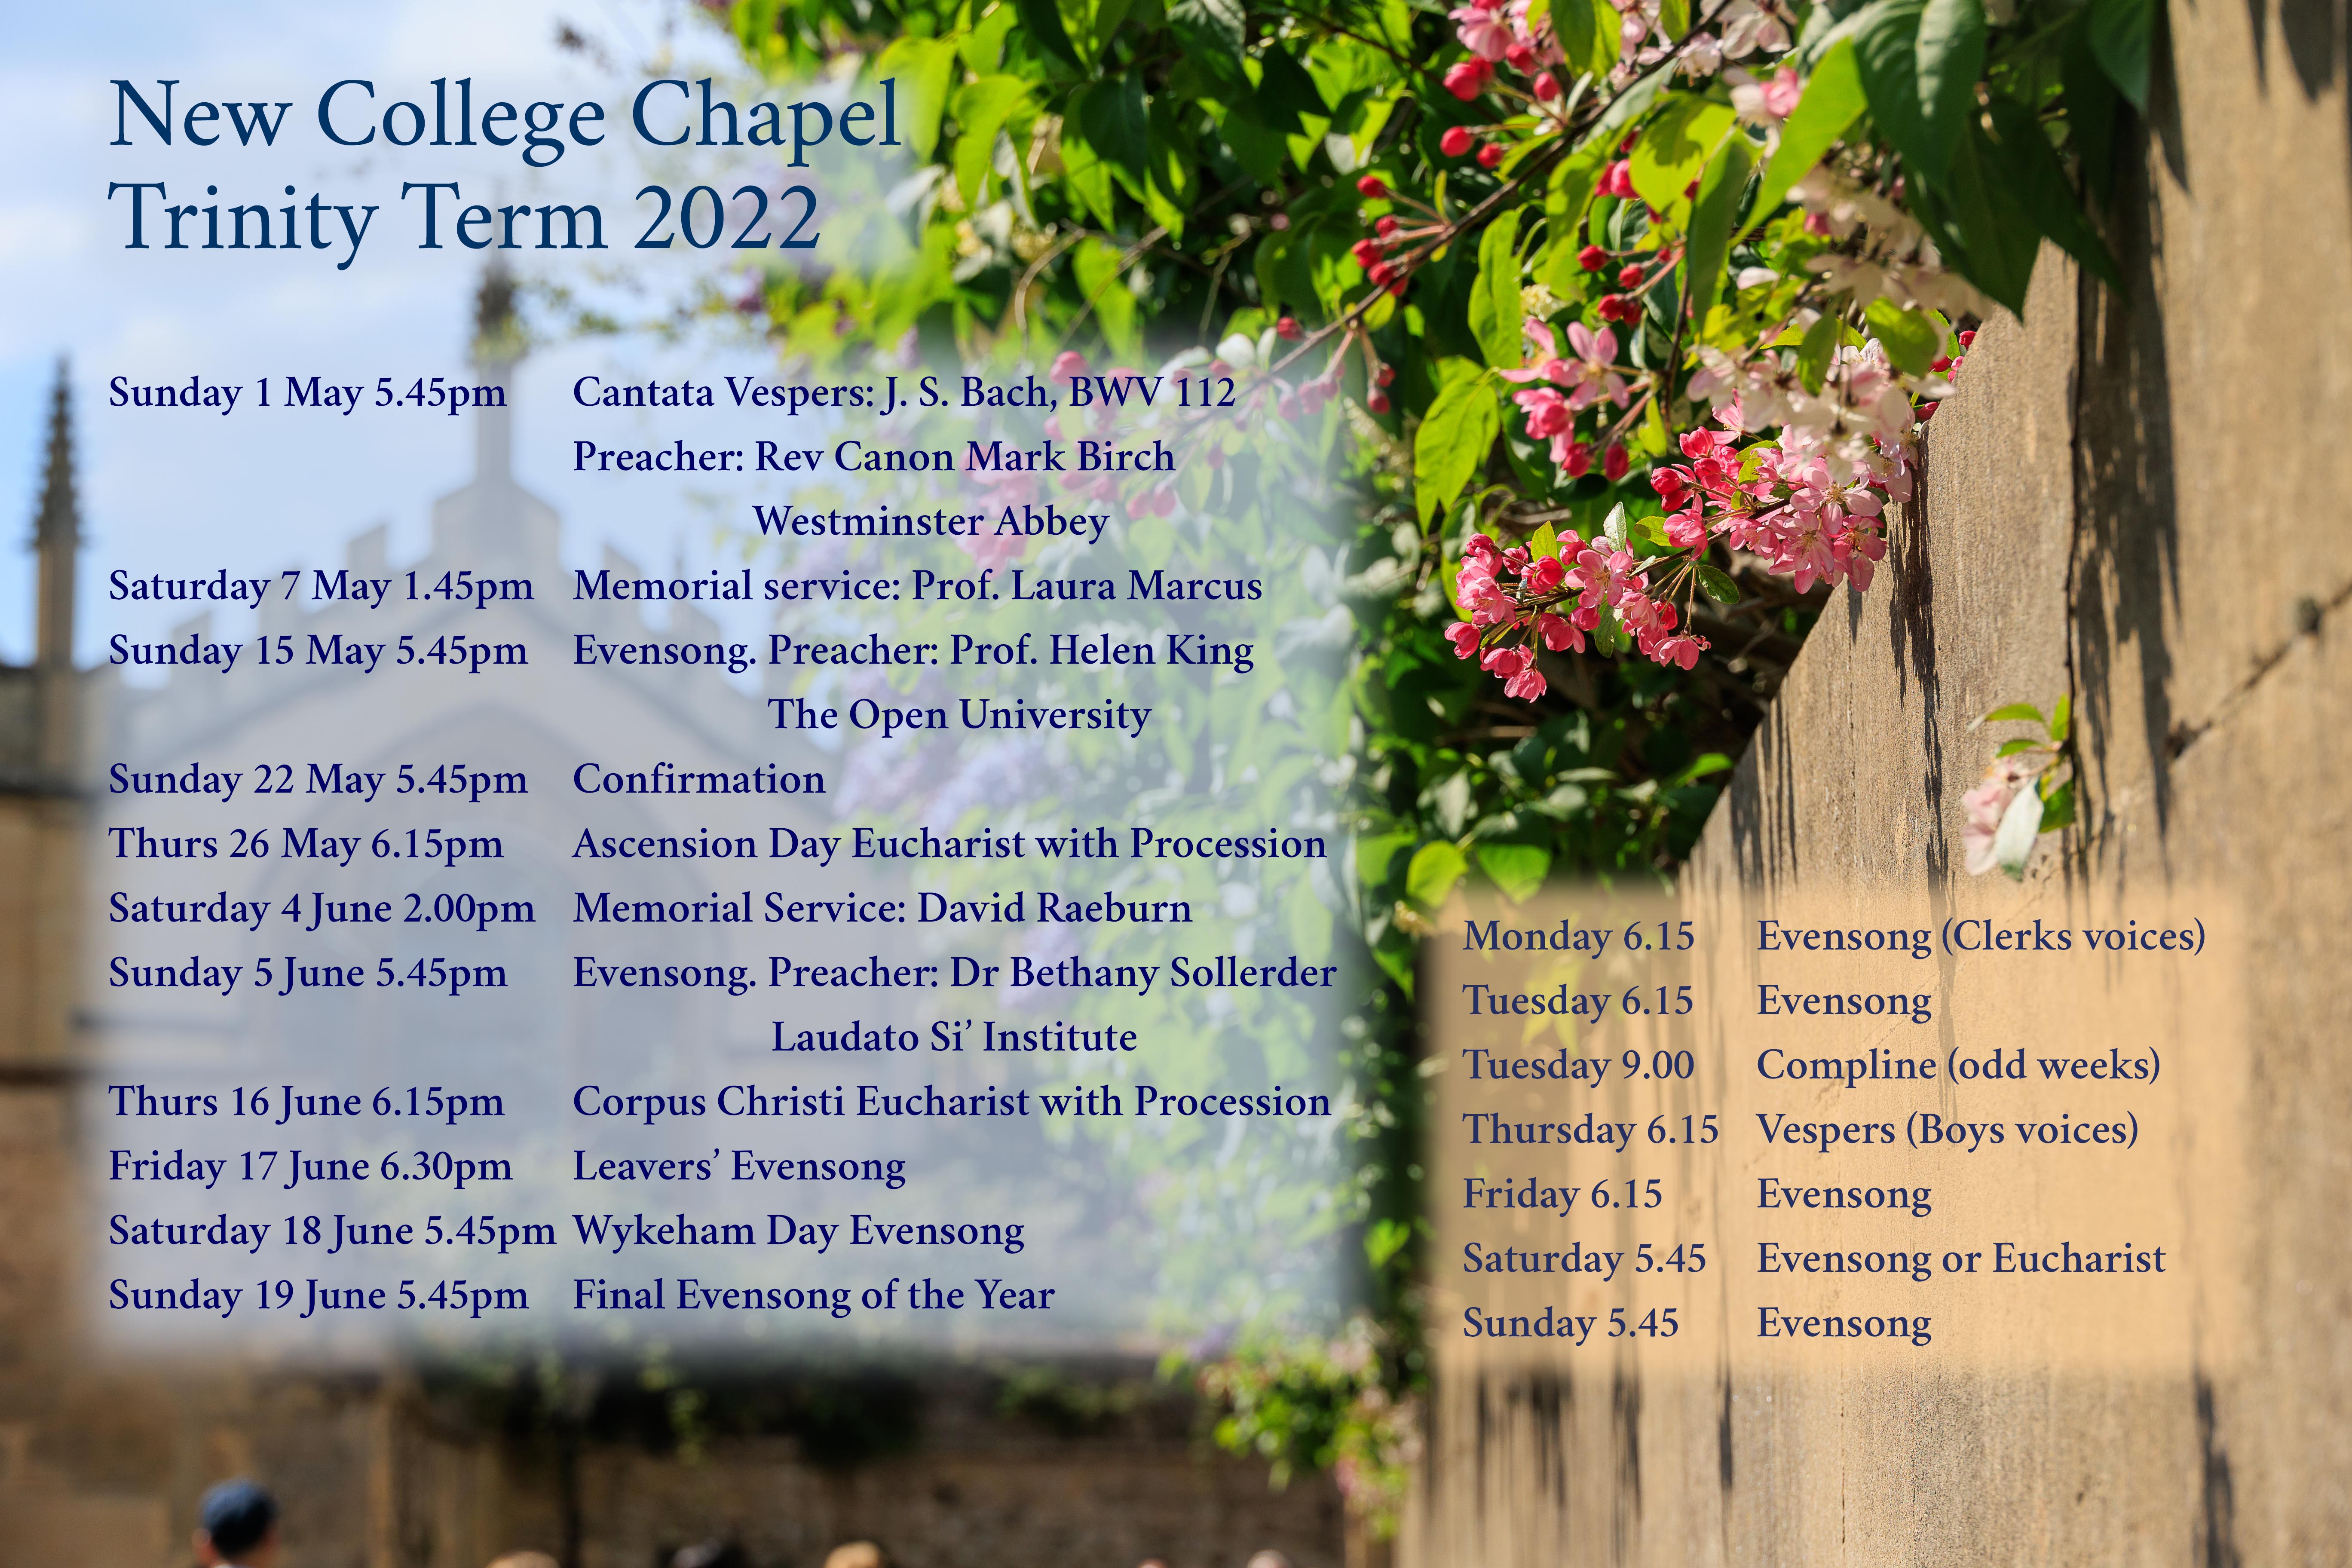 Poster of New College Chapel Services Trinity Term 2022